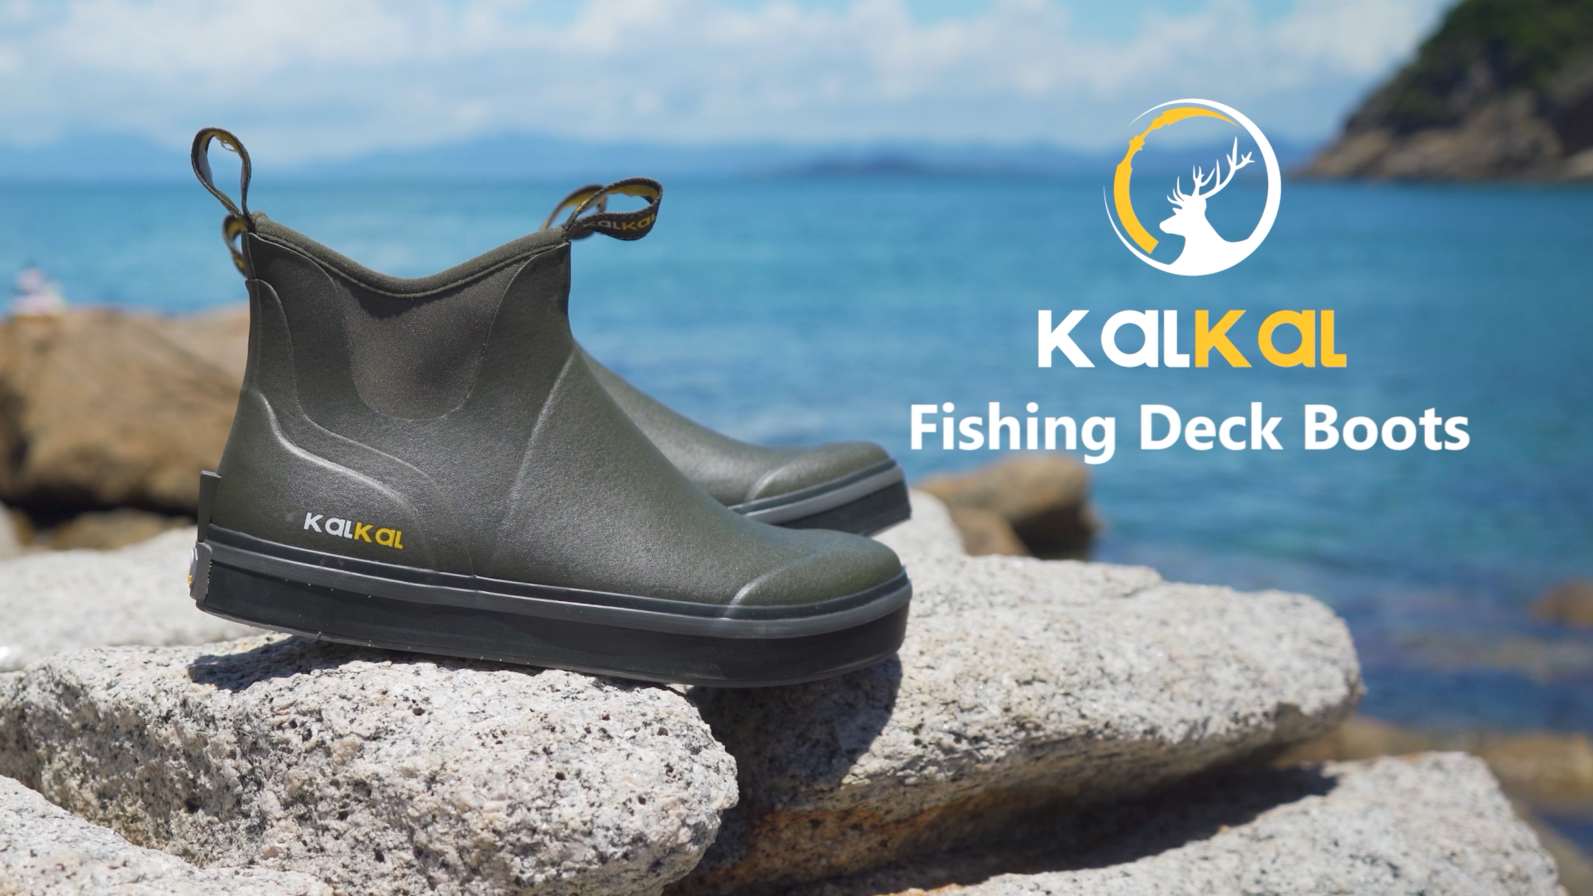 Kalkal Men's Ankle Deck Boots, Waterproof Rubber Fishing and Camp Boots -  Kalkal